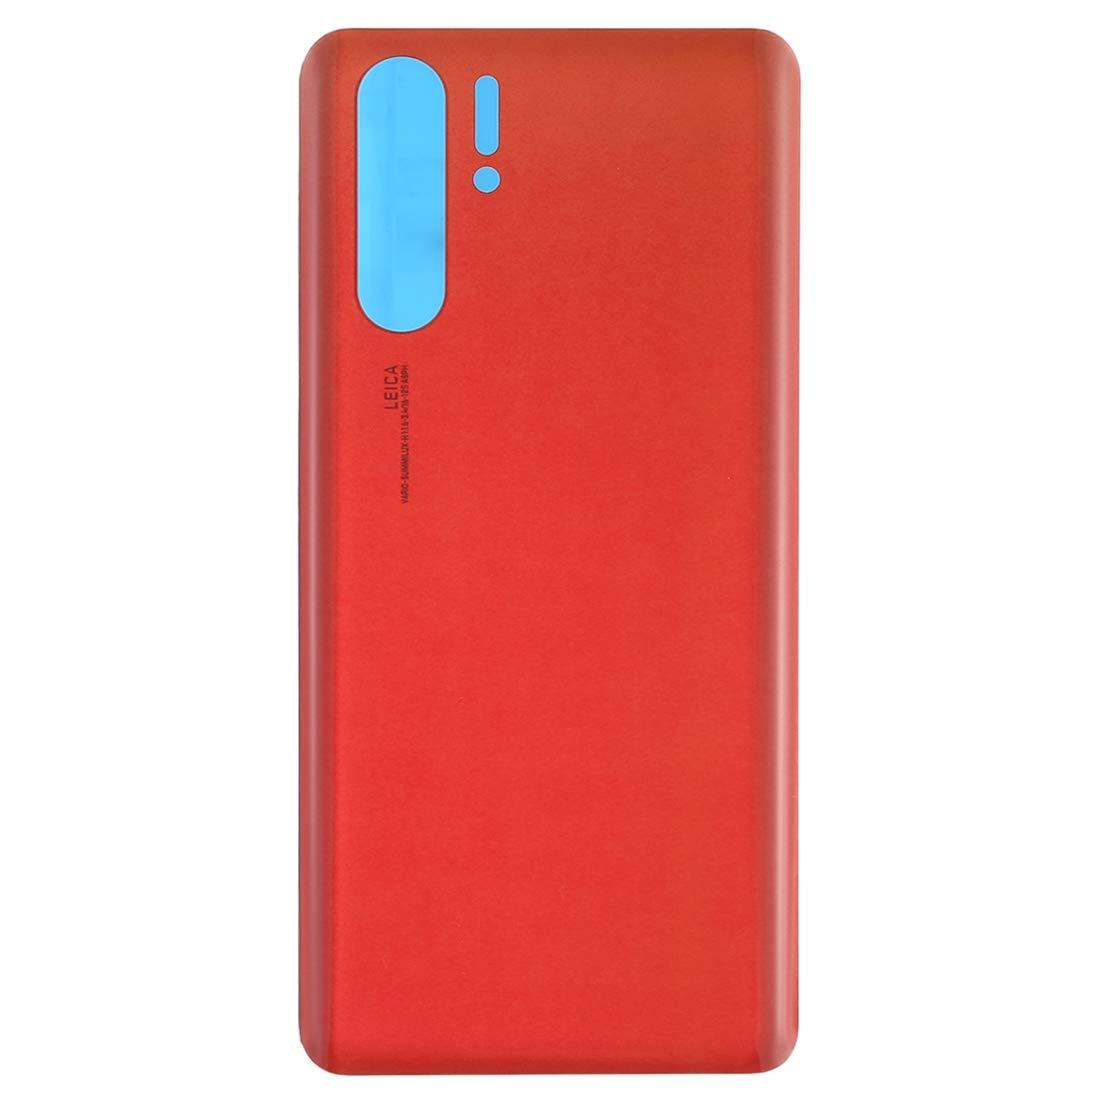 Back Glass Panel for Huawei P30 Pro Red